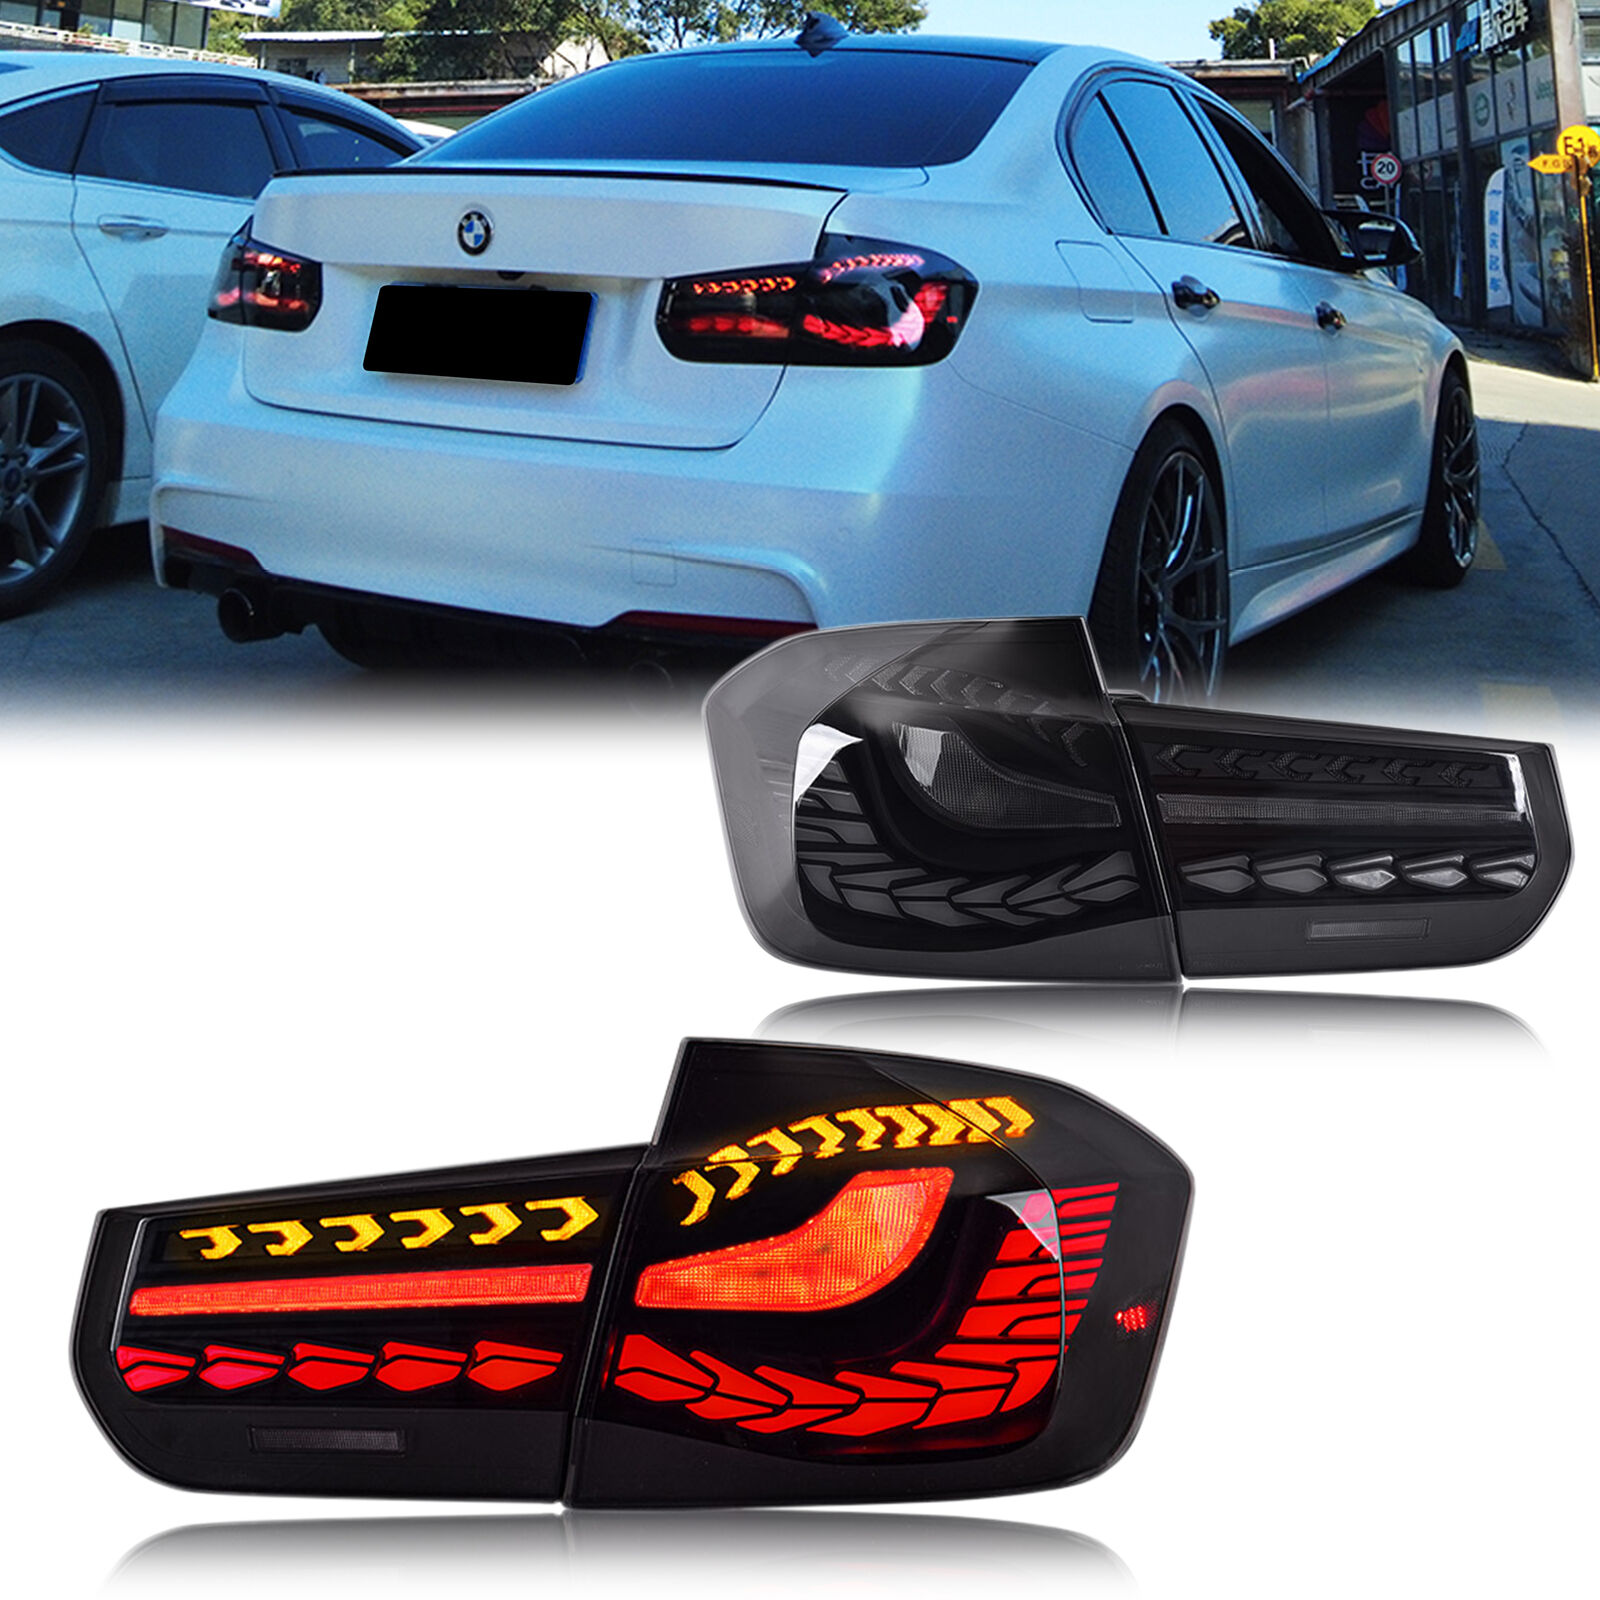 LED GTS Tail Lights for BMW 3 Series 2012-2018 F30 F80 M3 Animation Rear Lamps 